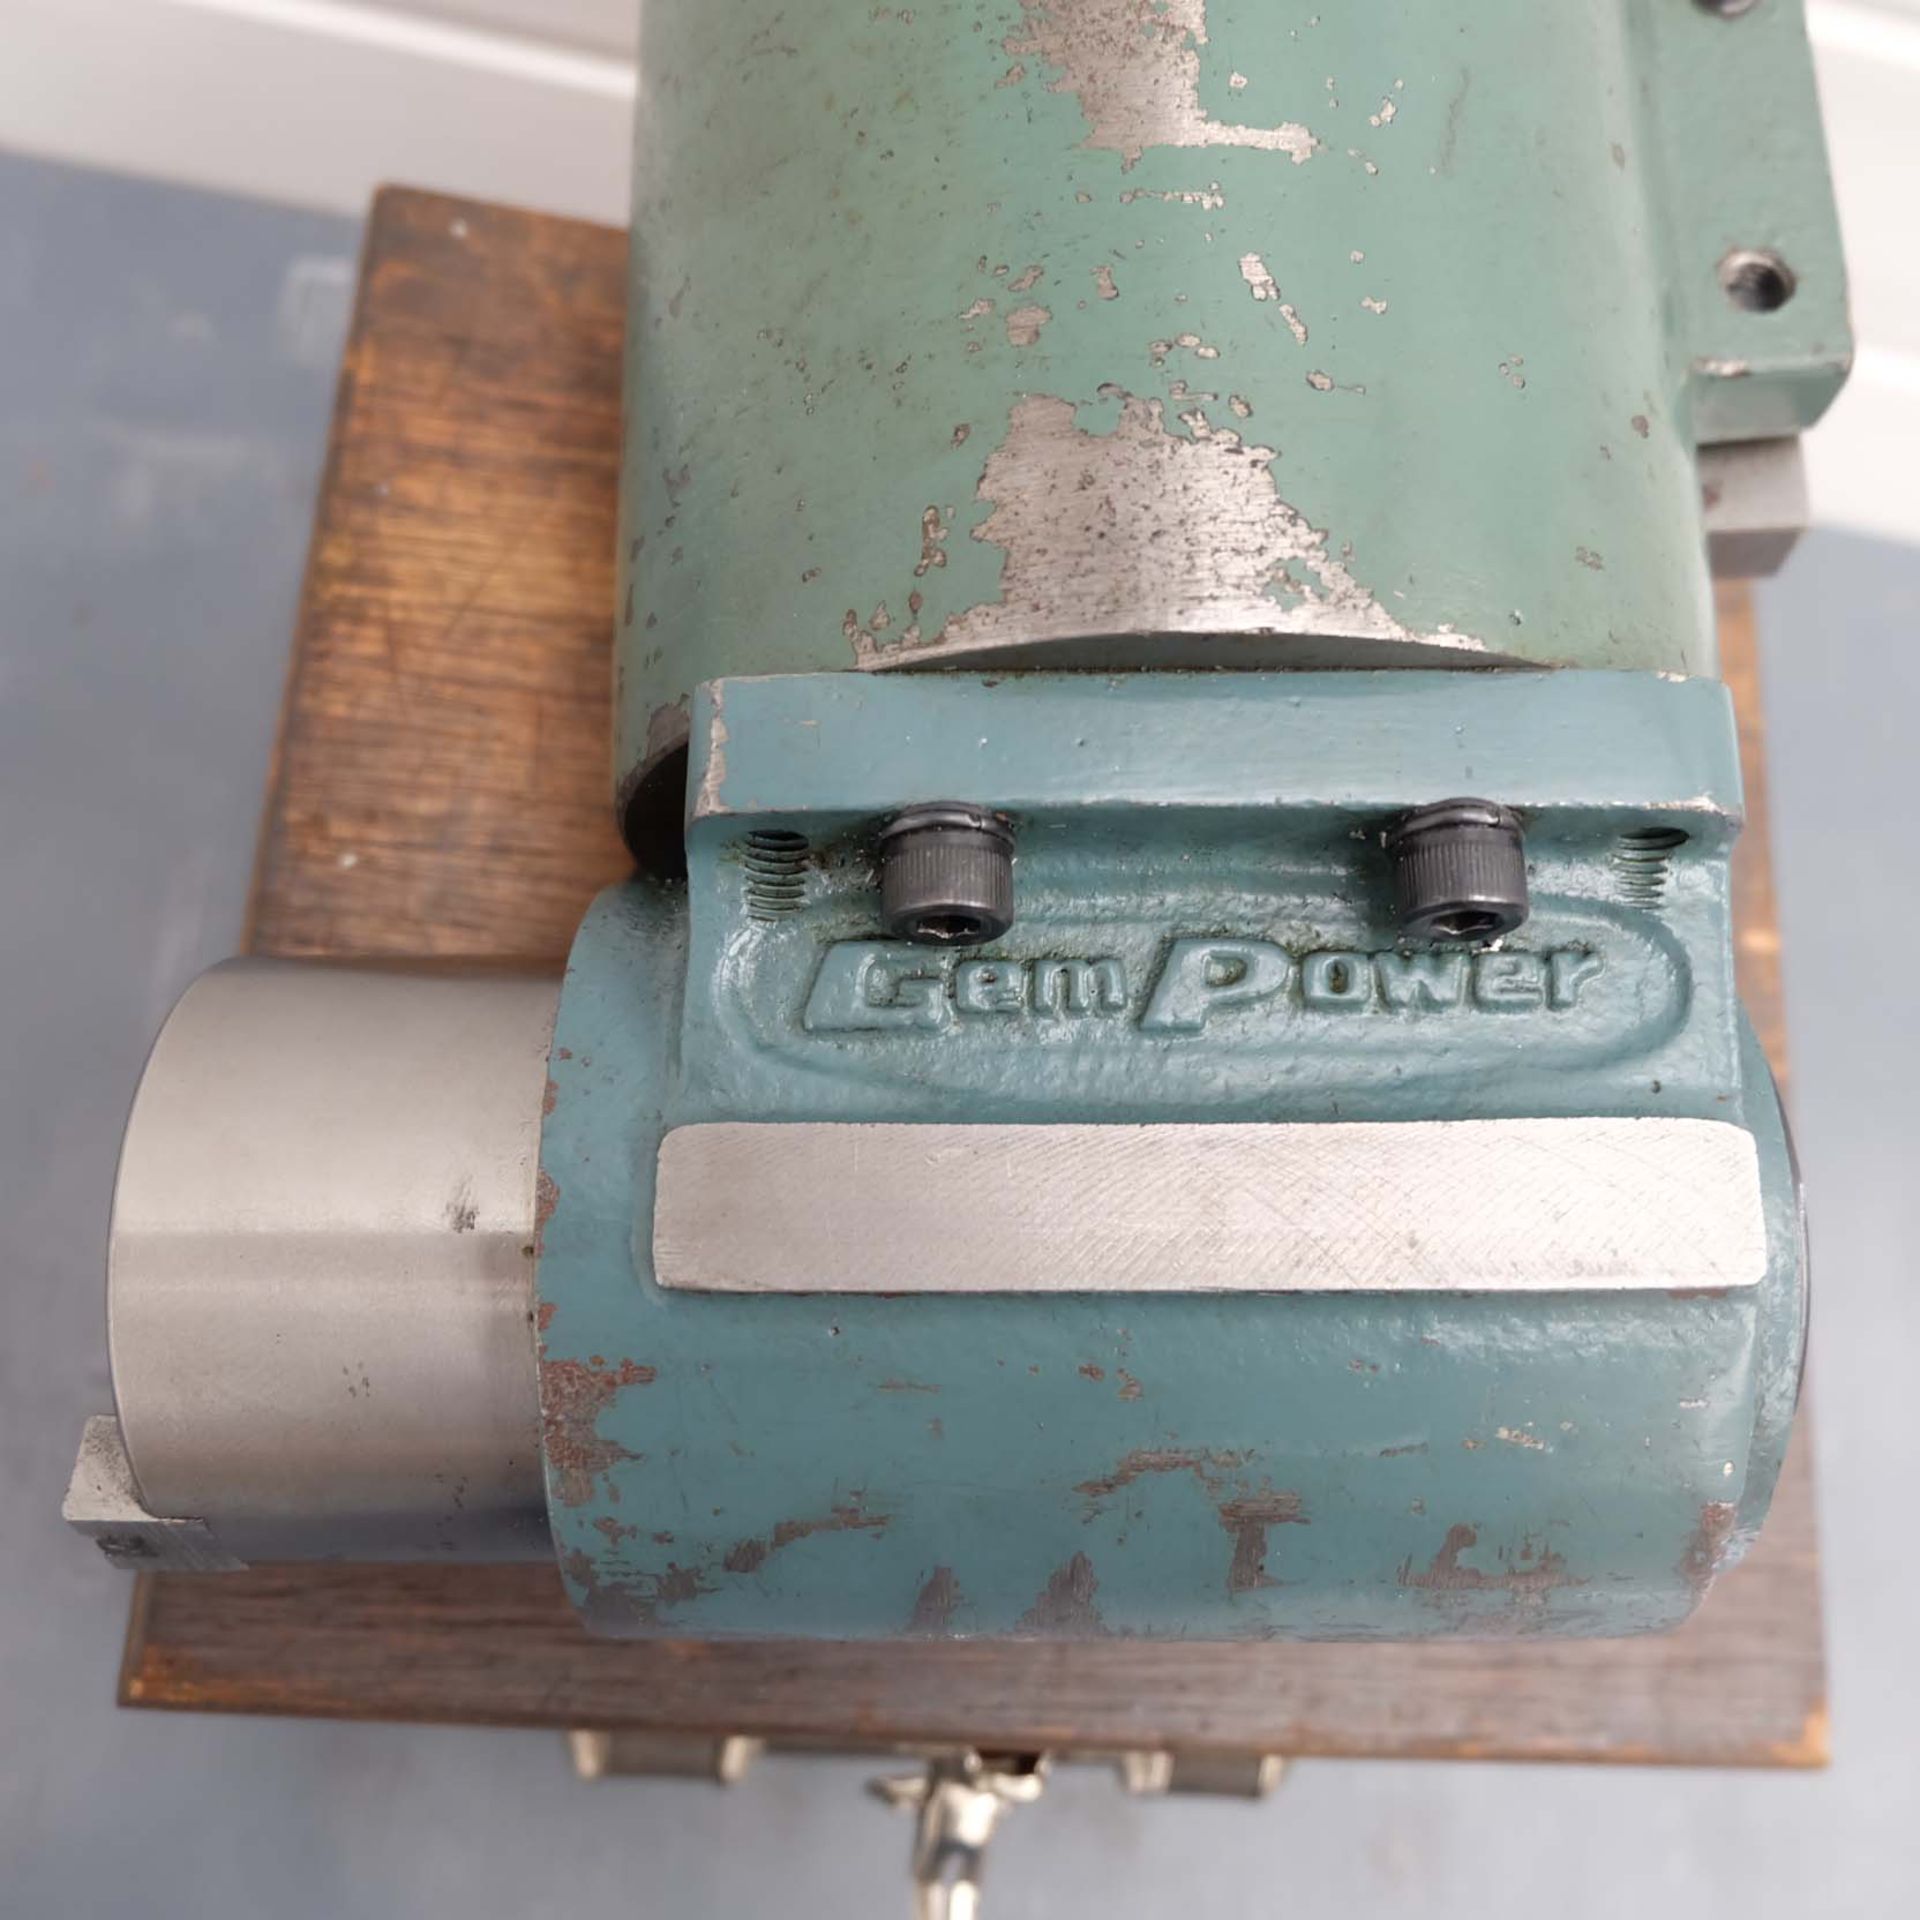 Gem Power Right Angle Milling Attachment. Spindle Tapers Both 40 ISO. Drawbar Threading 5/8" Whit. S - Image 8 of 8